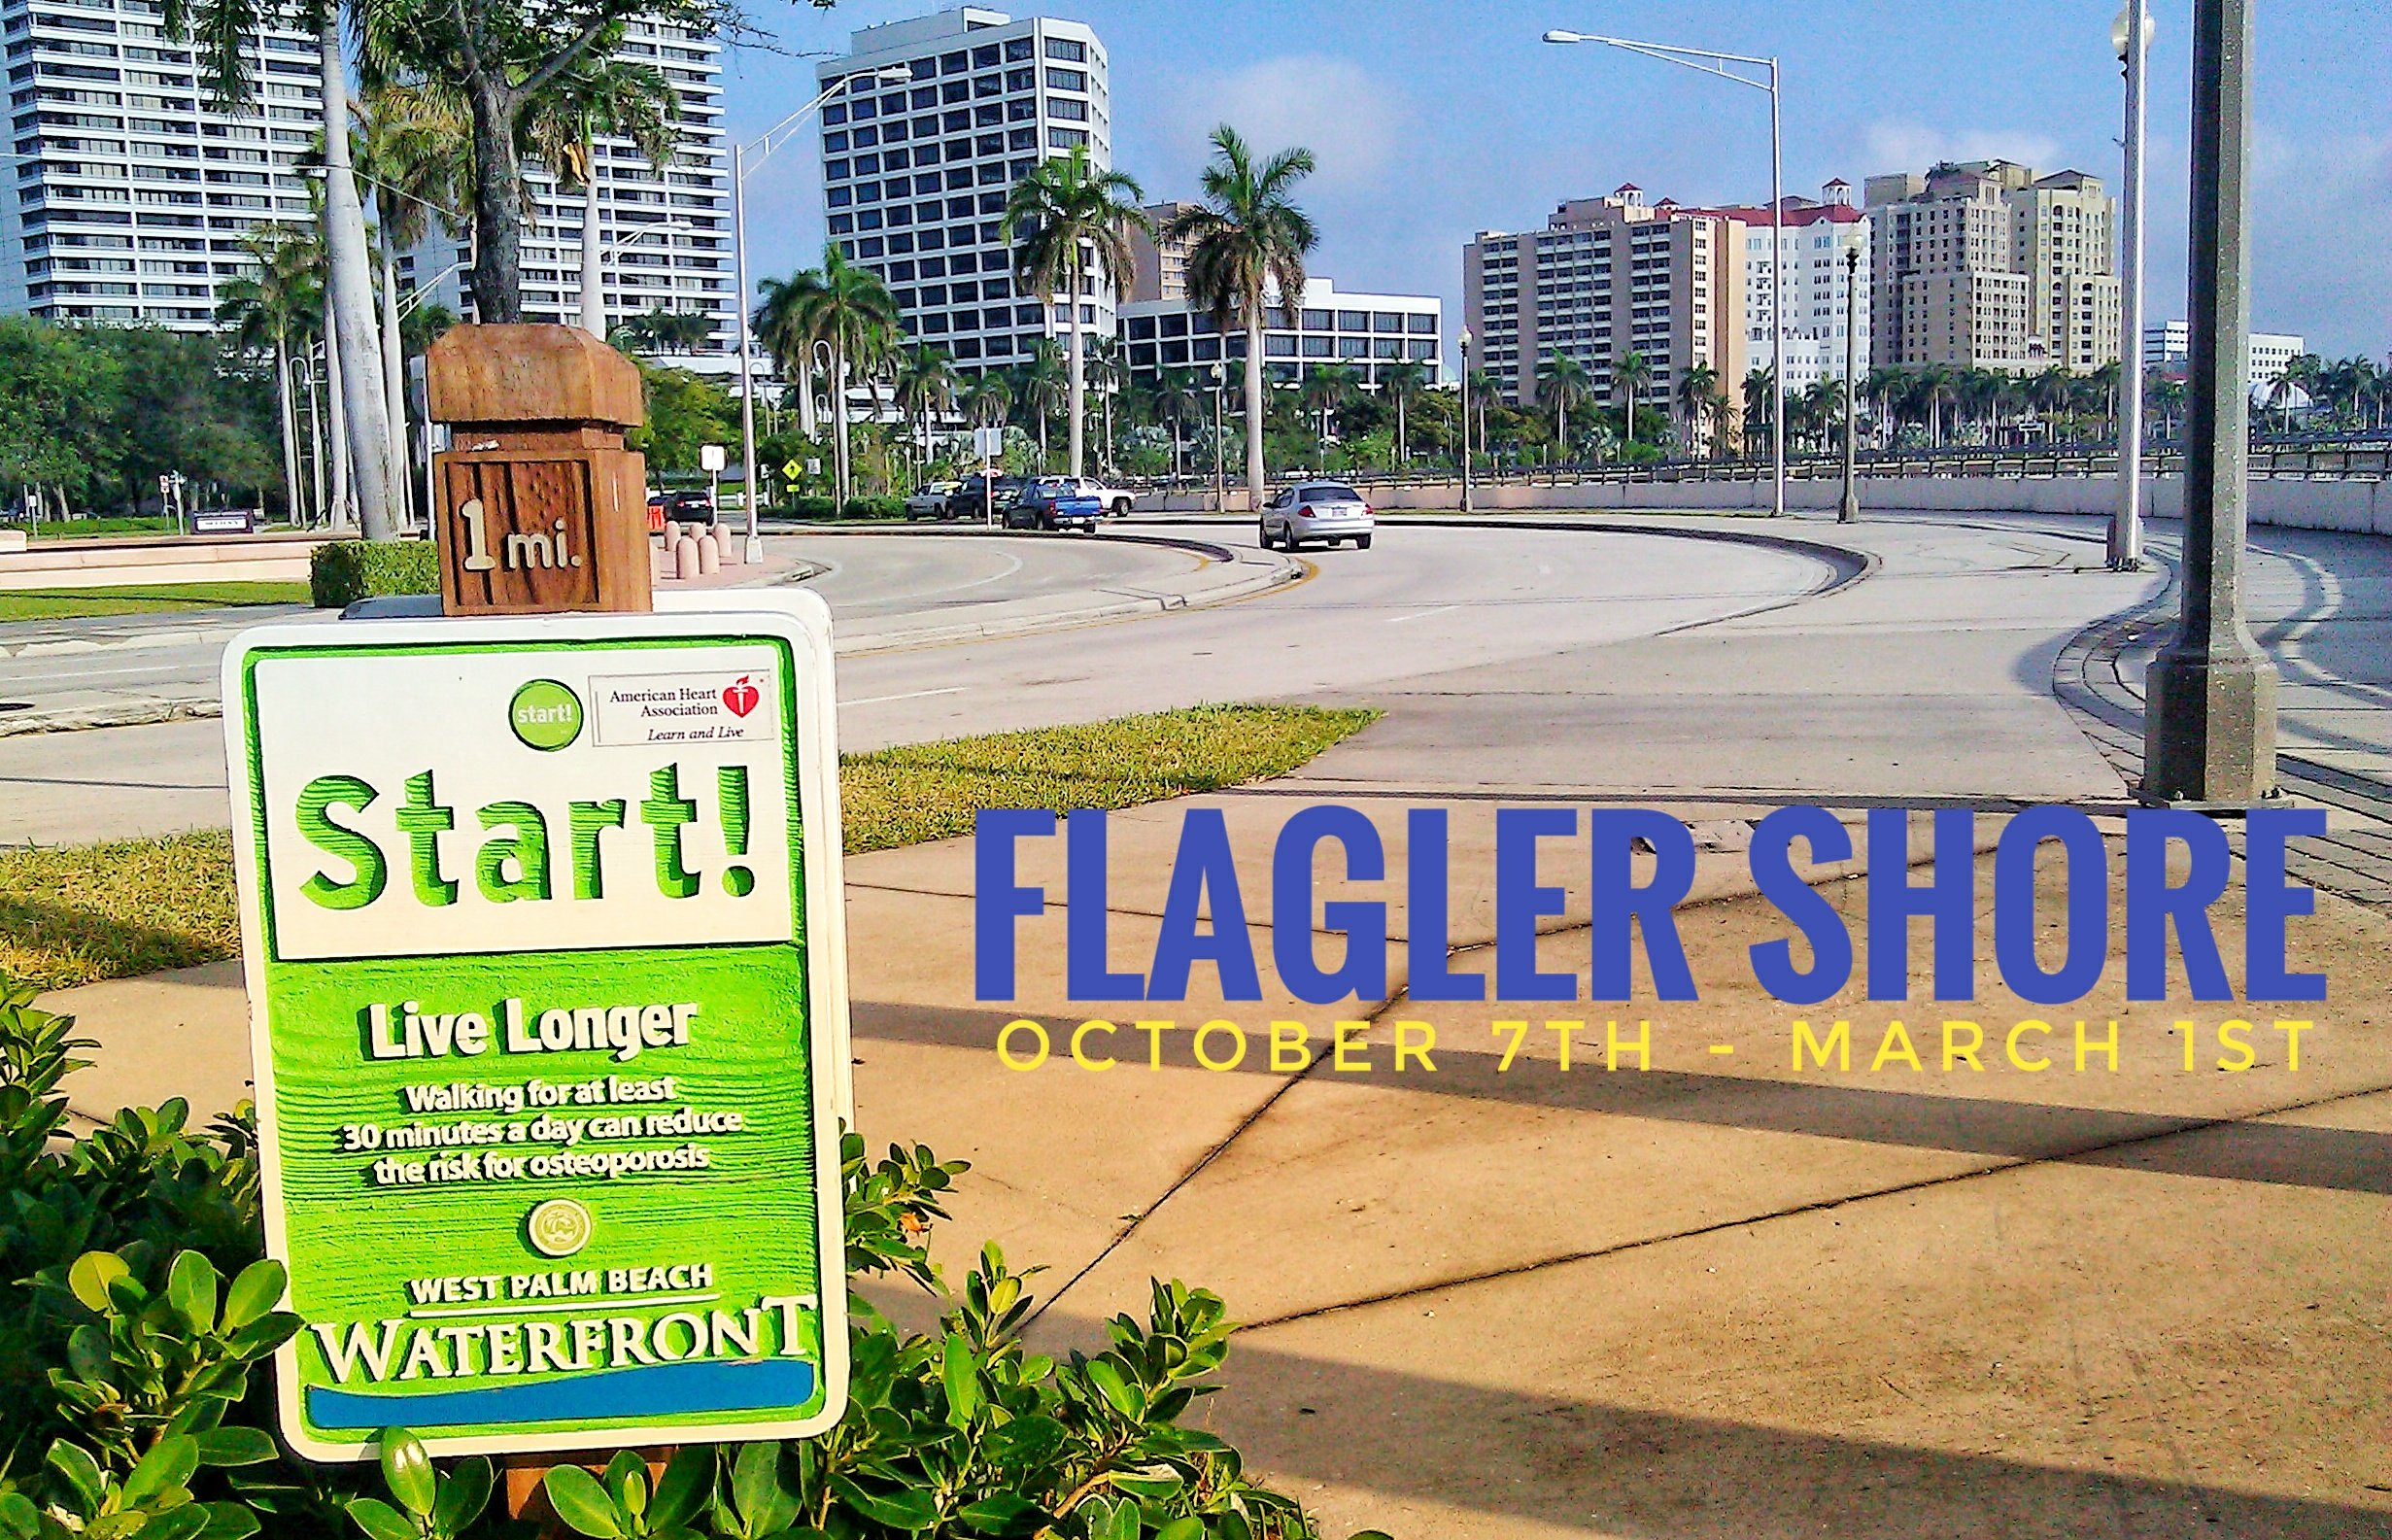 City to repurpose two lanes of Flagler Dr. on the Waterfront to Pedestrian & Public Use